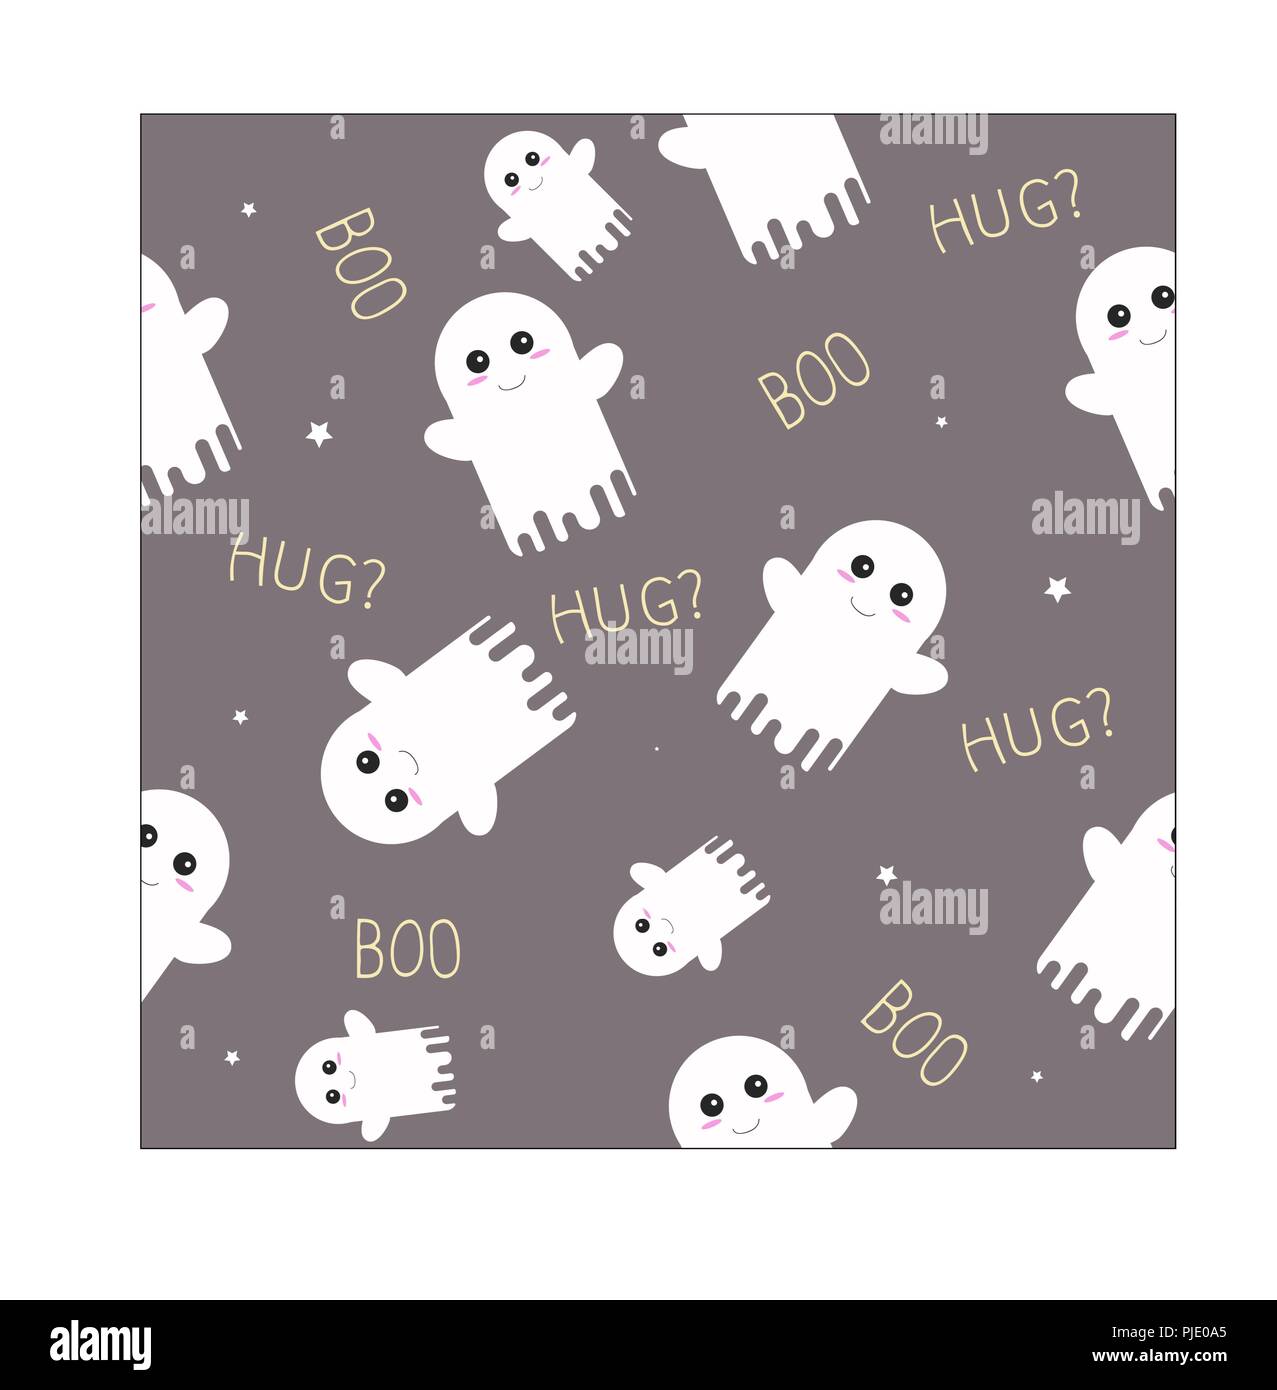 Cute Ghost Halloween Seamless Pattern with Boo and Hug Texts. Stock Vector